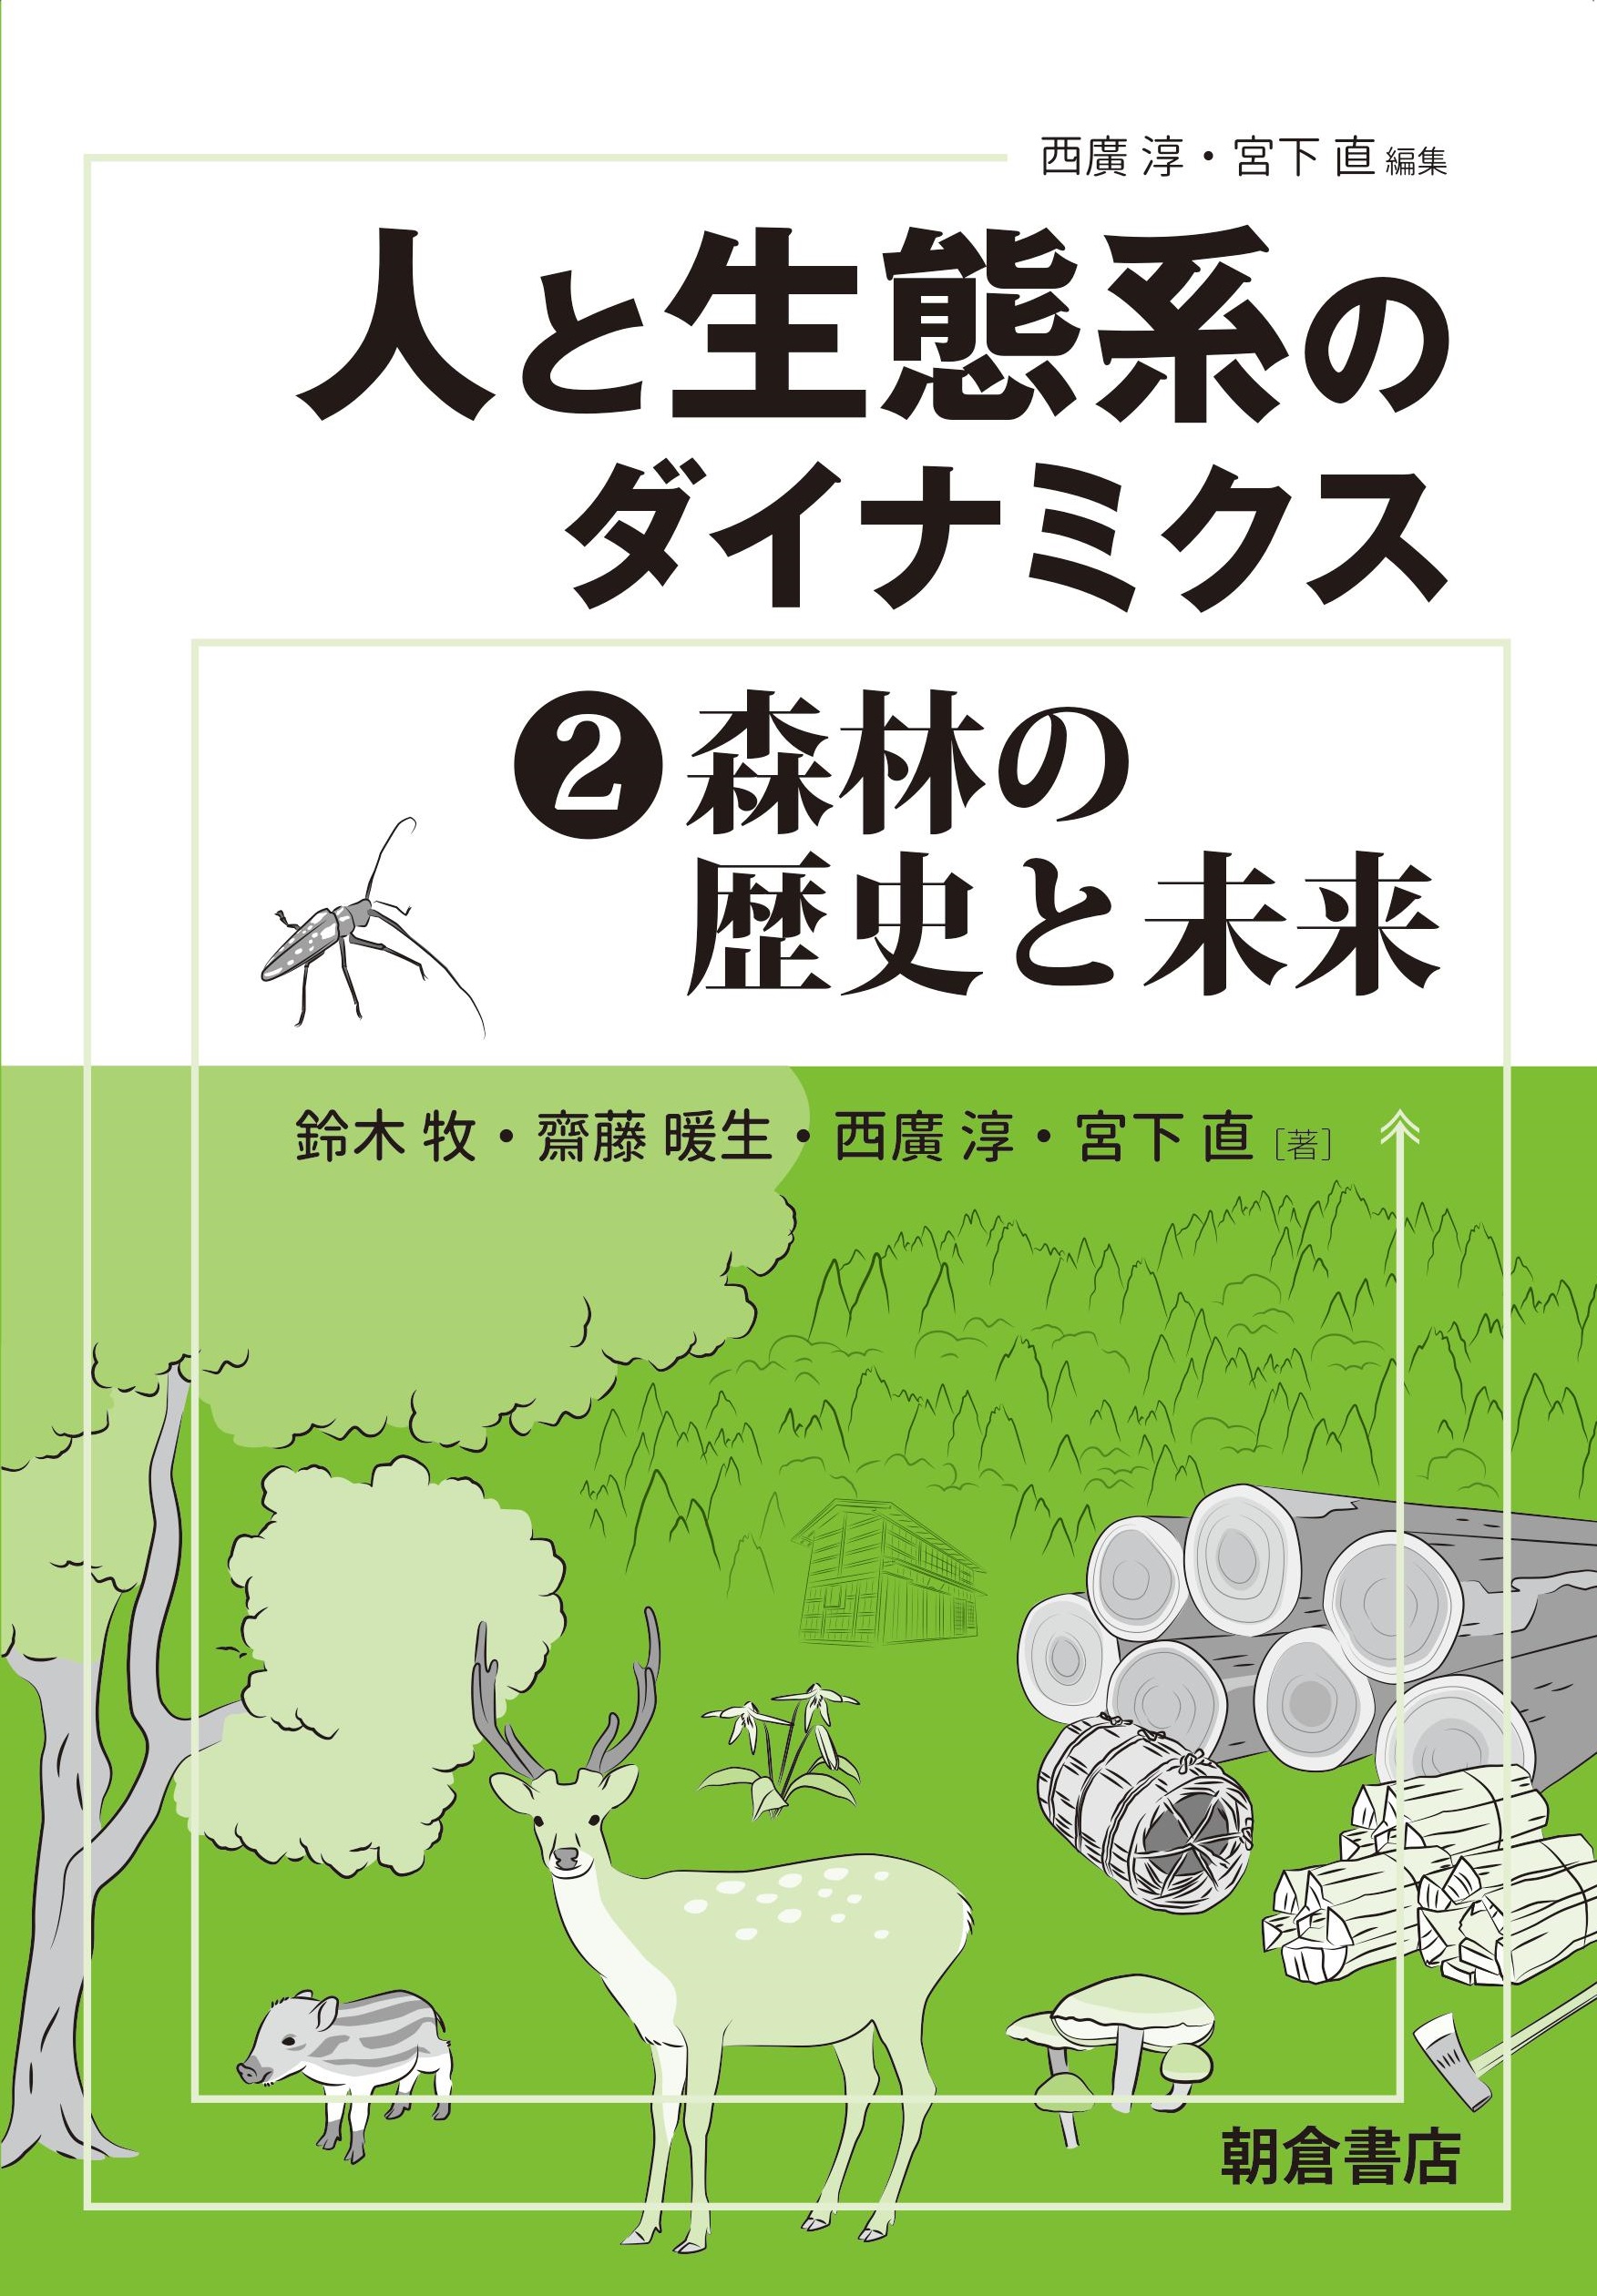 Illustrations of forest and animals on a light green cover